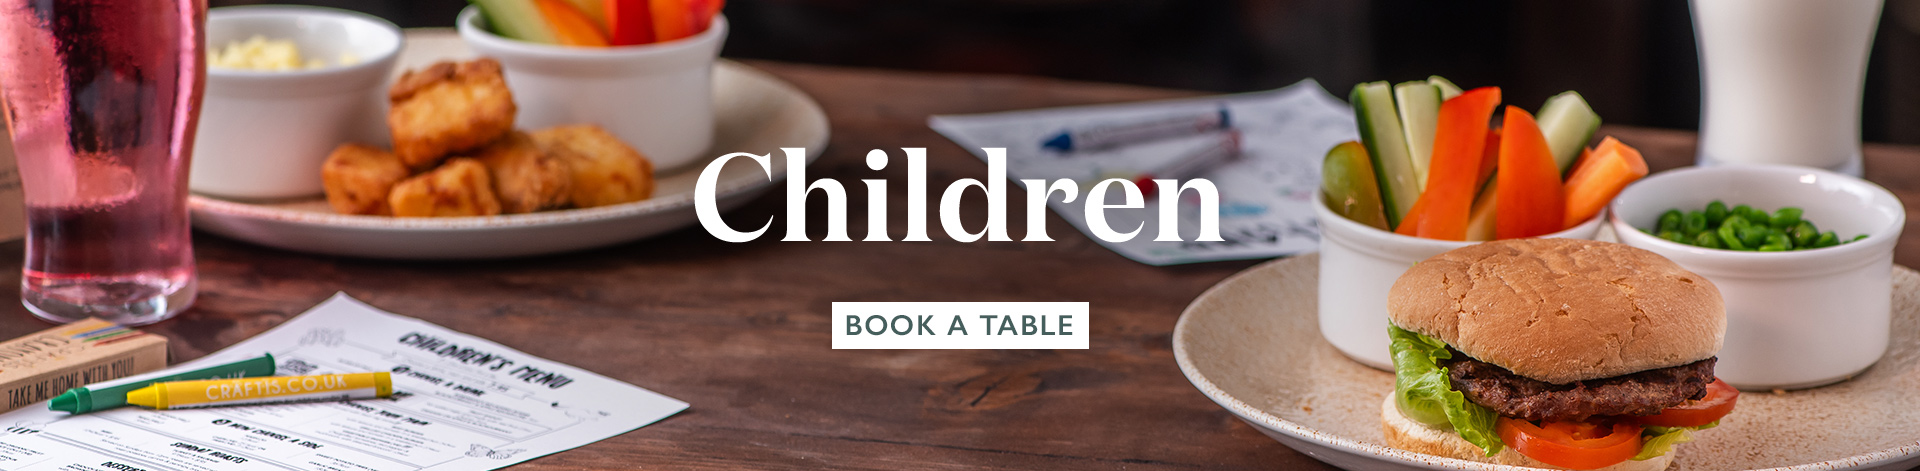 Children's Menu at The Wolseley Arms